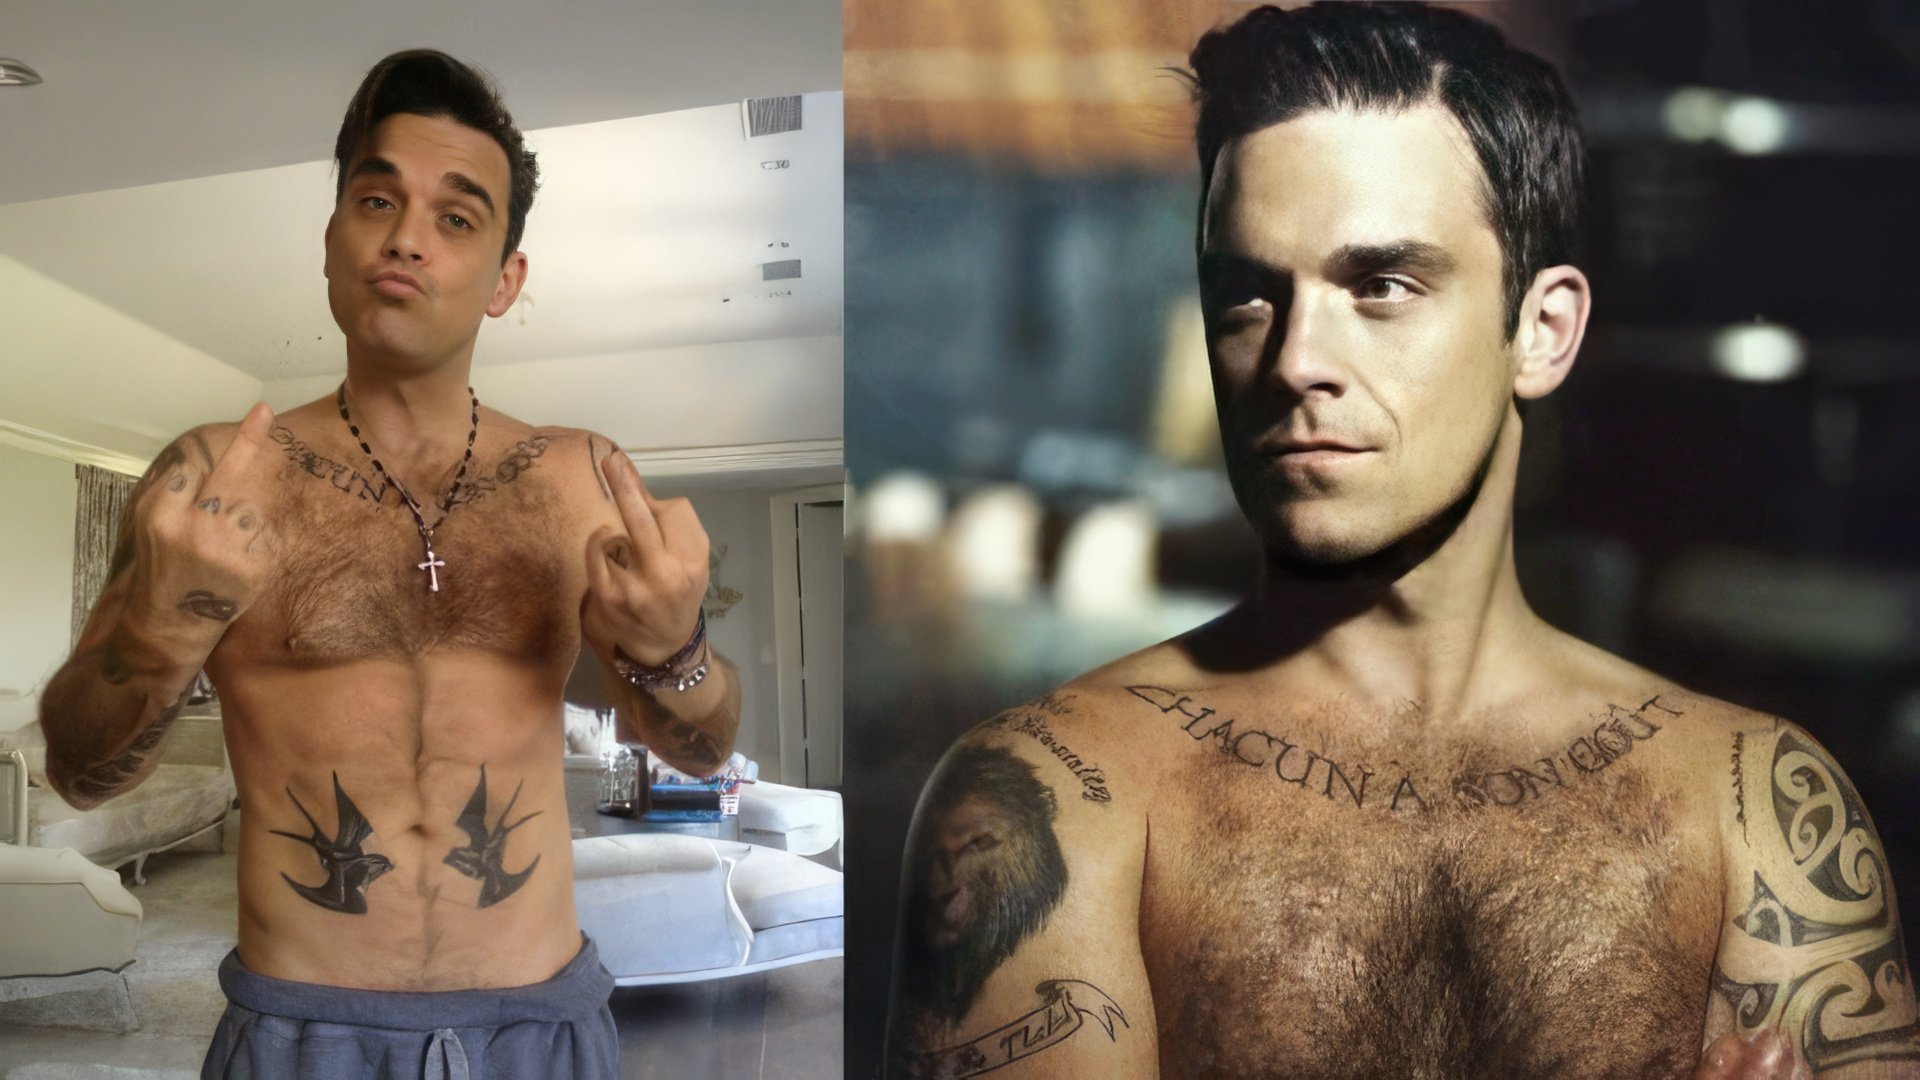 Robbie Williams has many tattoos and is always ready for more